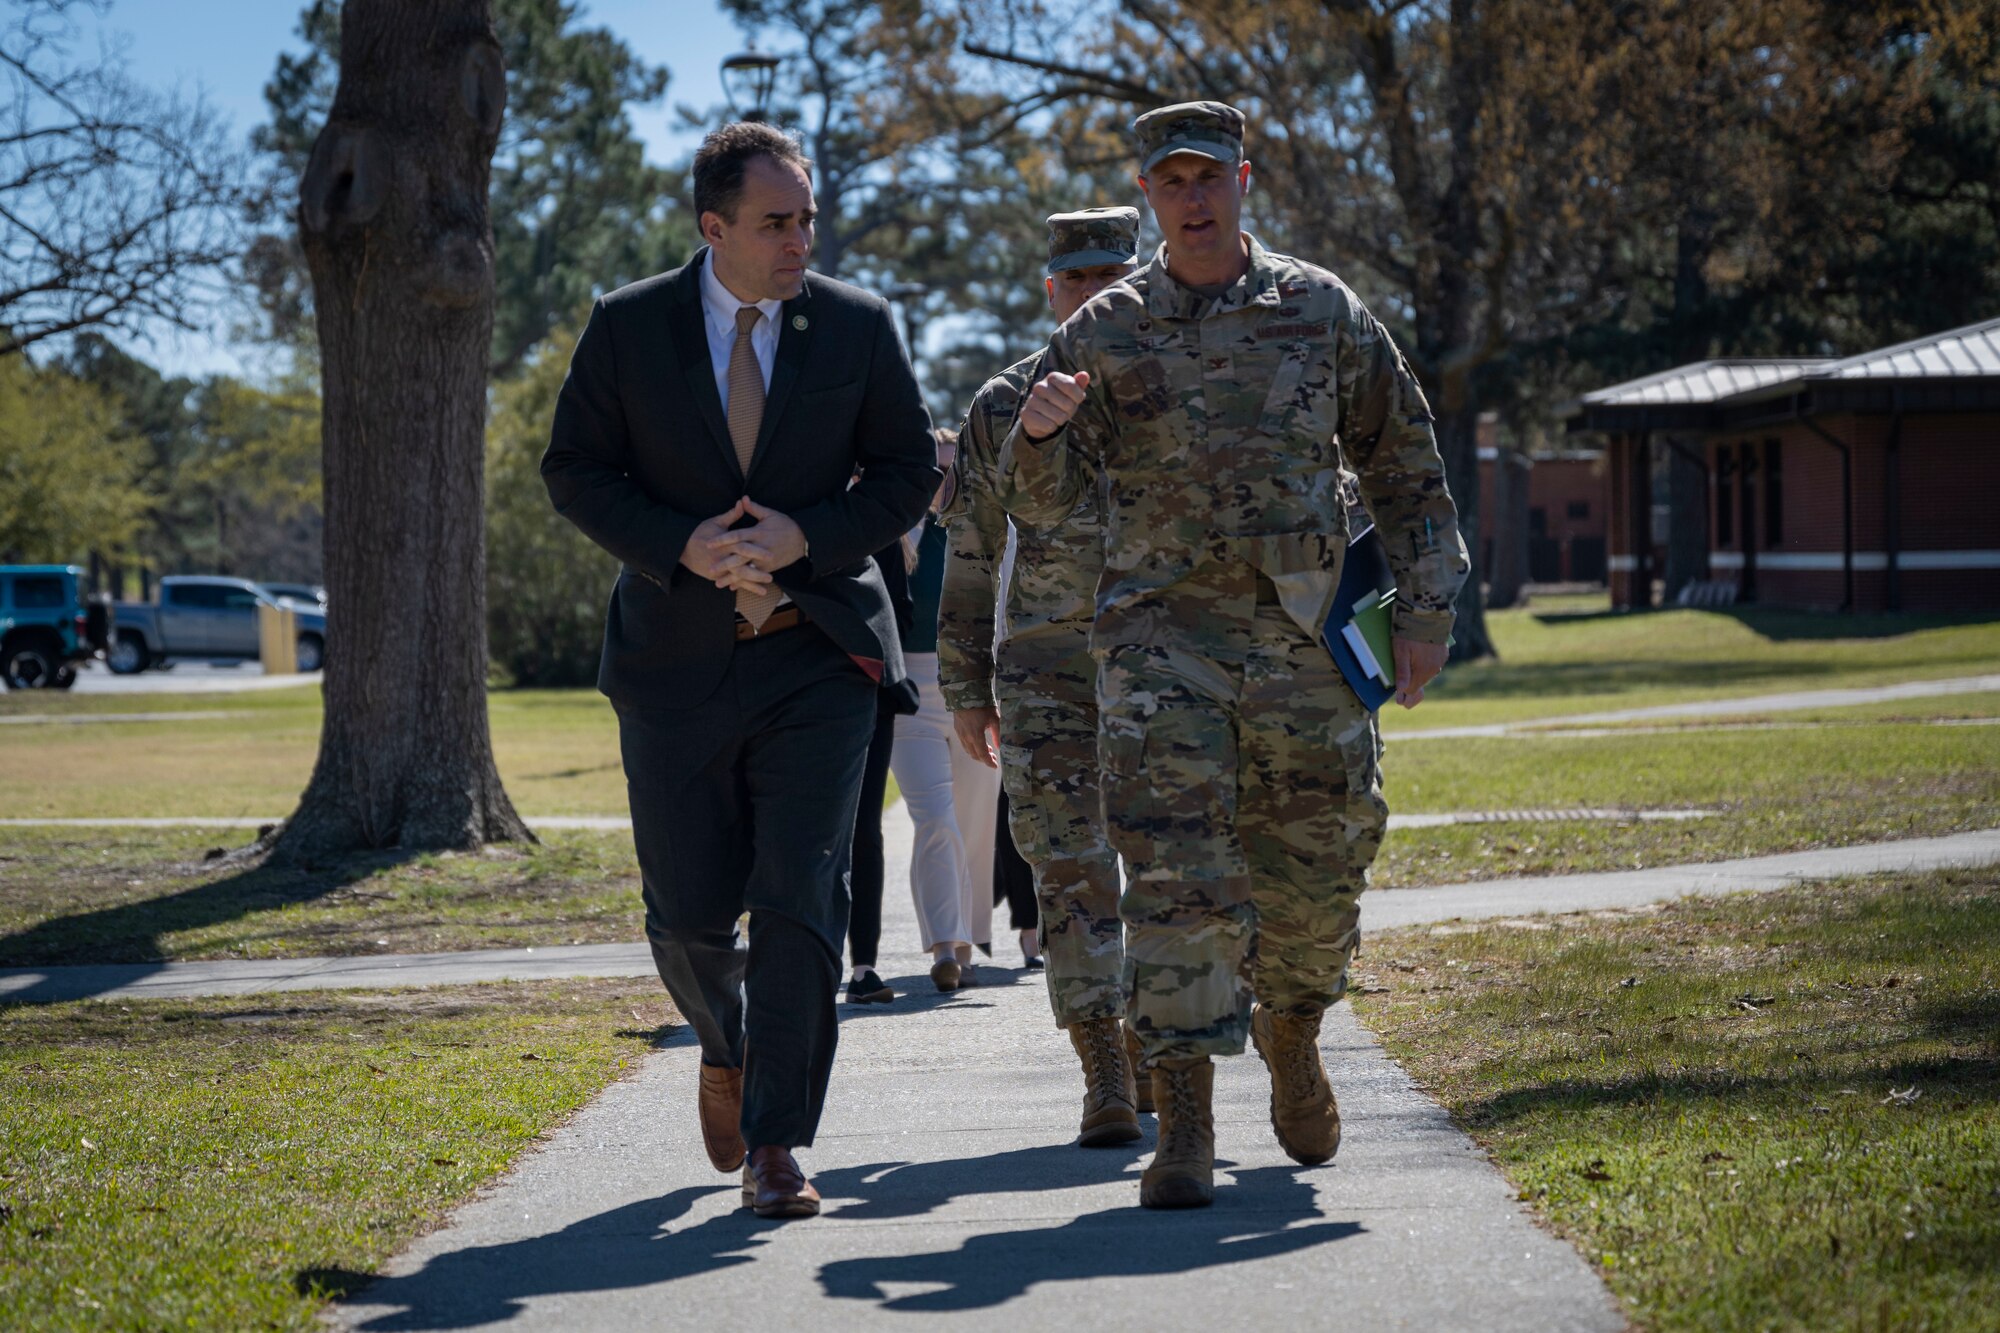 The Honorable Wiley Nickel, left, North Carolina congressman, walks with Col. Lucas Teel, 4th Fighter Wing commander, at Seymour Johnson Air Force Base, North Carolina, March 15, 2023. Nickel is a representative for North Carolina’s 13th district and visited Seymour Johnson AFB to learn more about its mission.